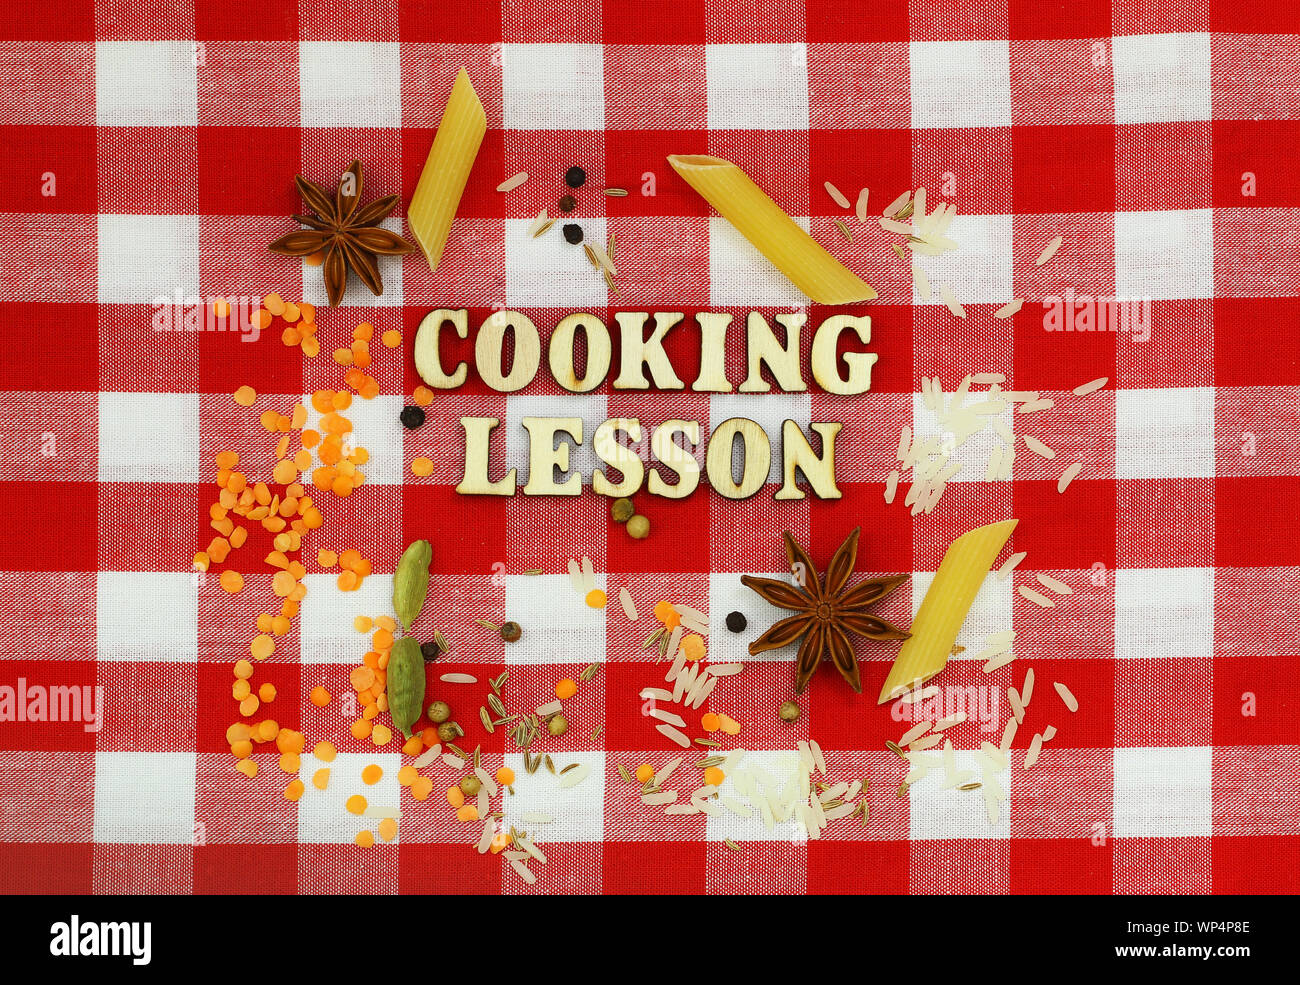 Cooking lesson written with wooden letters on checkered cloth and cooking ingredients Stock Photo